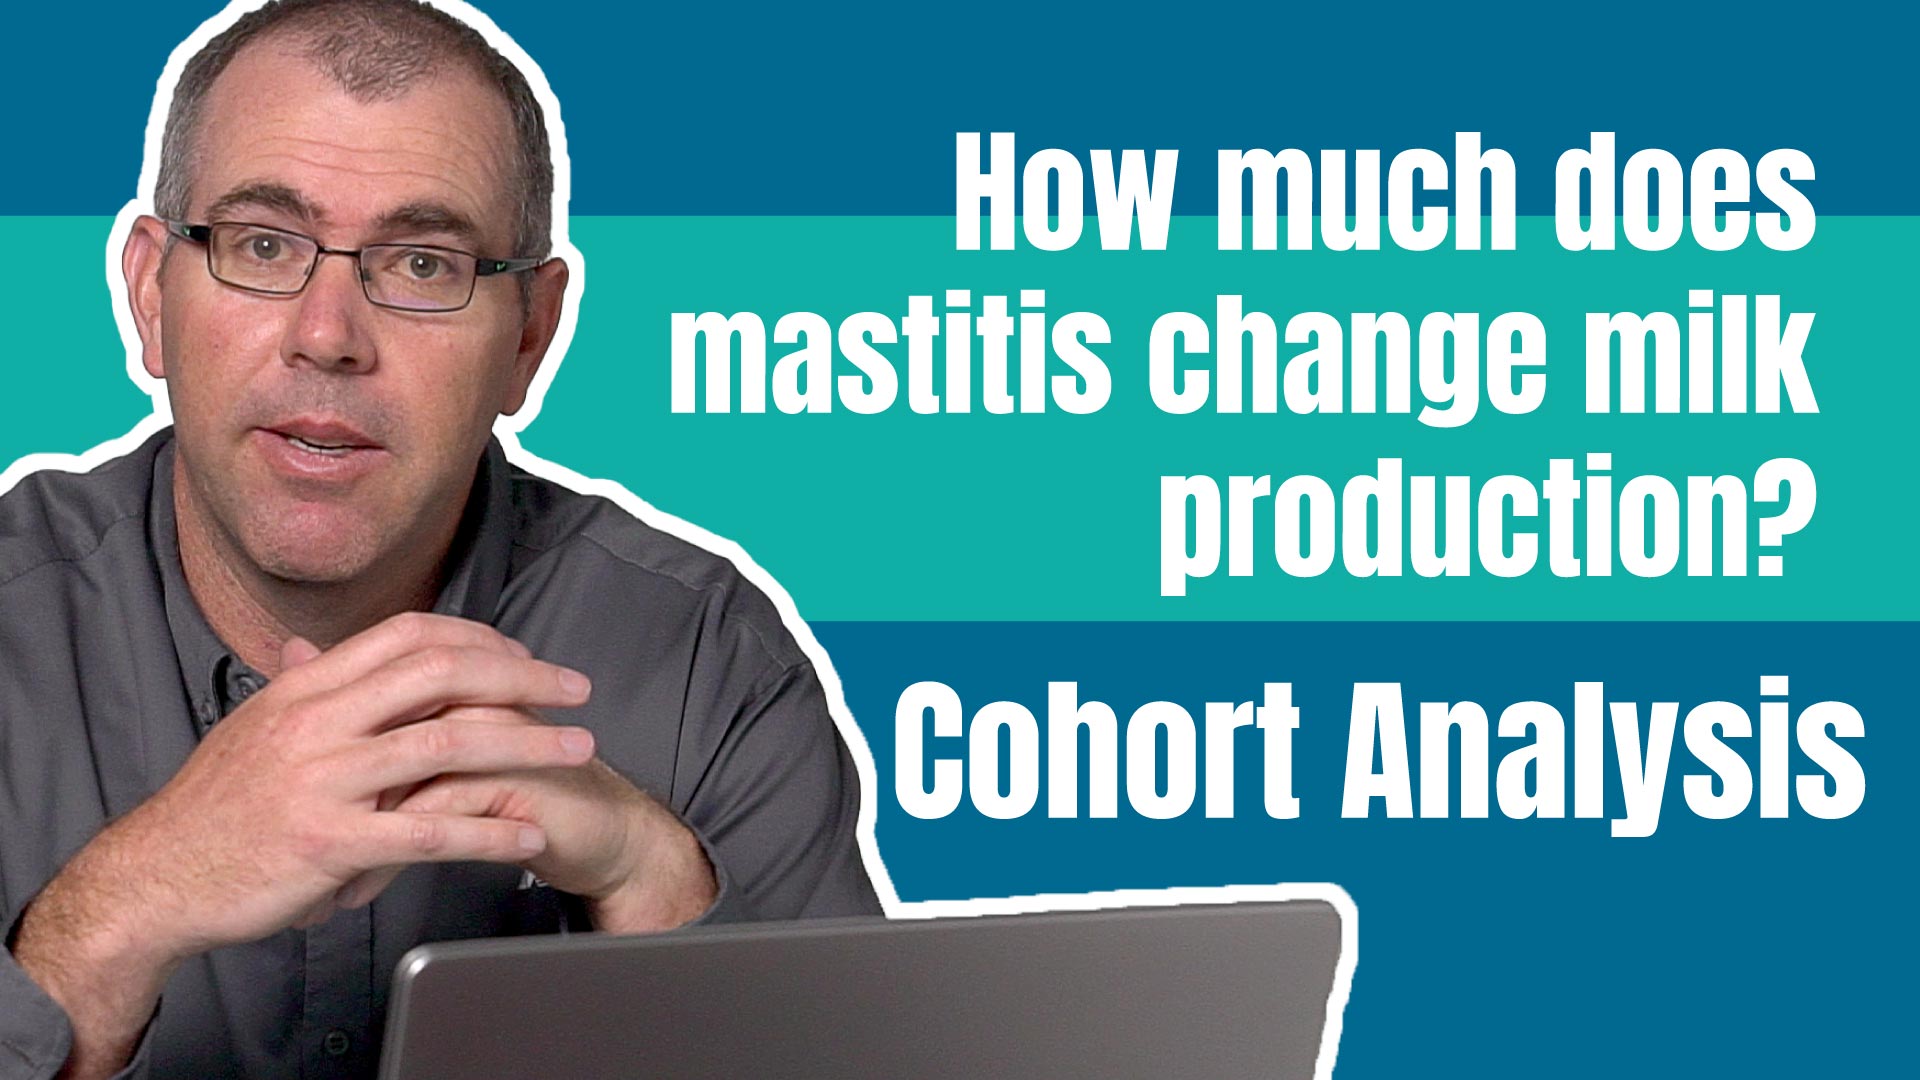 How much does mastitis change milk production?